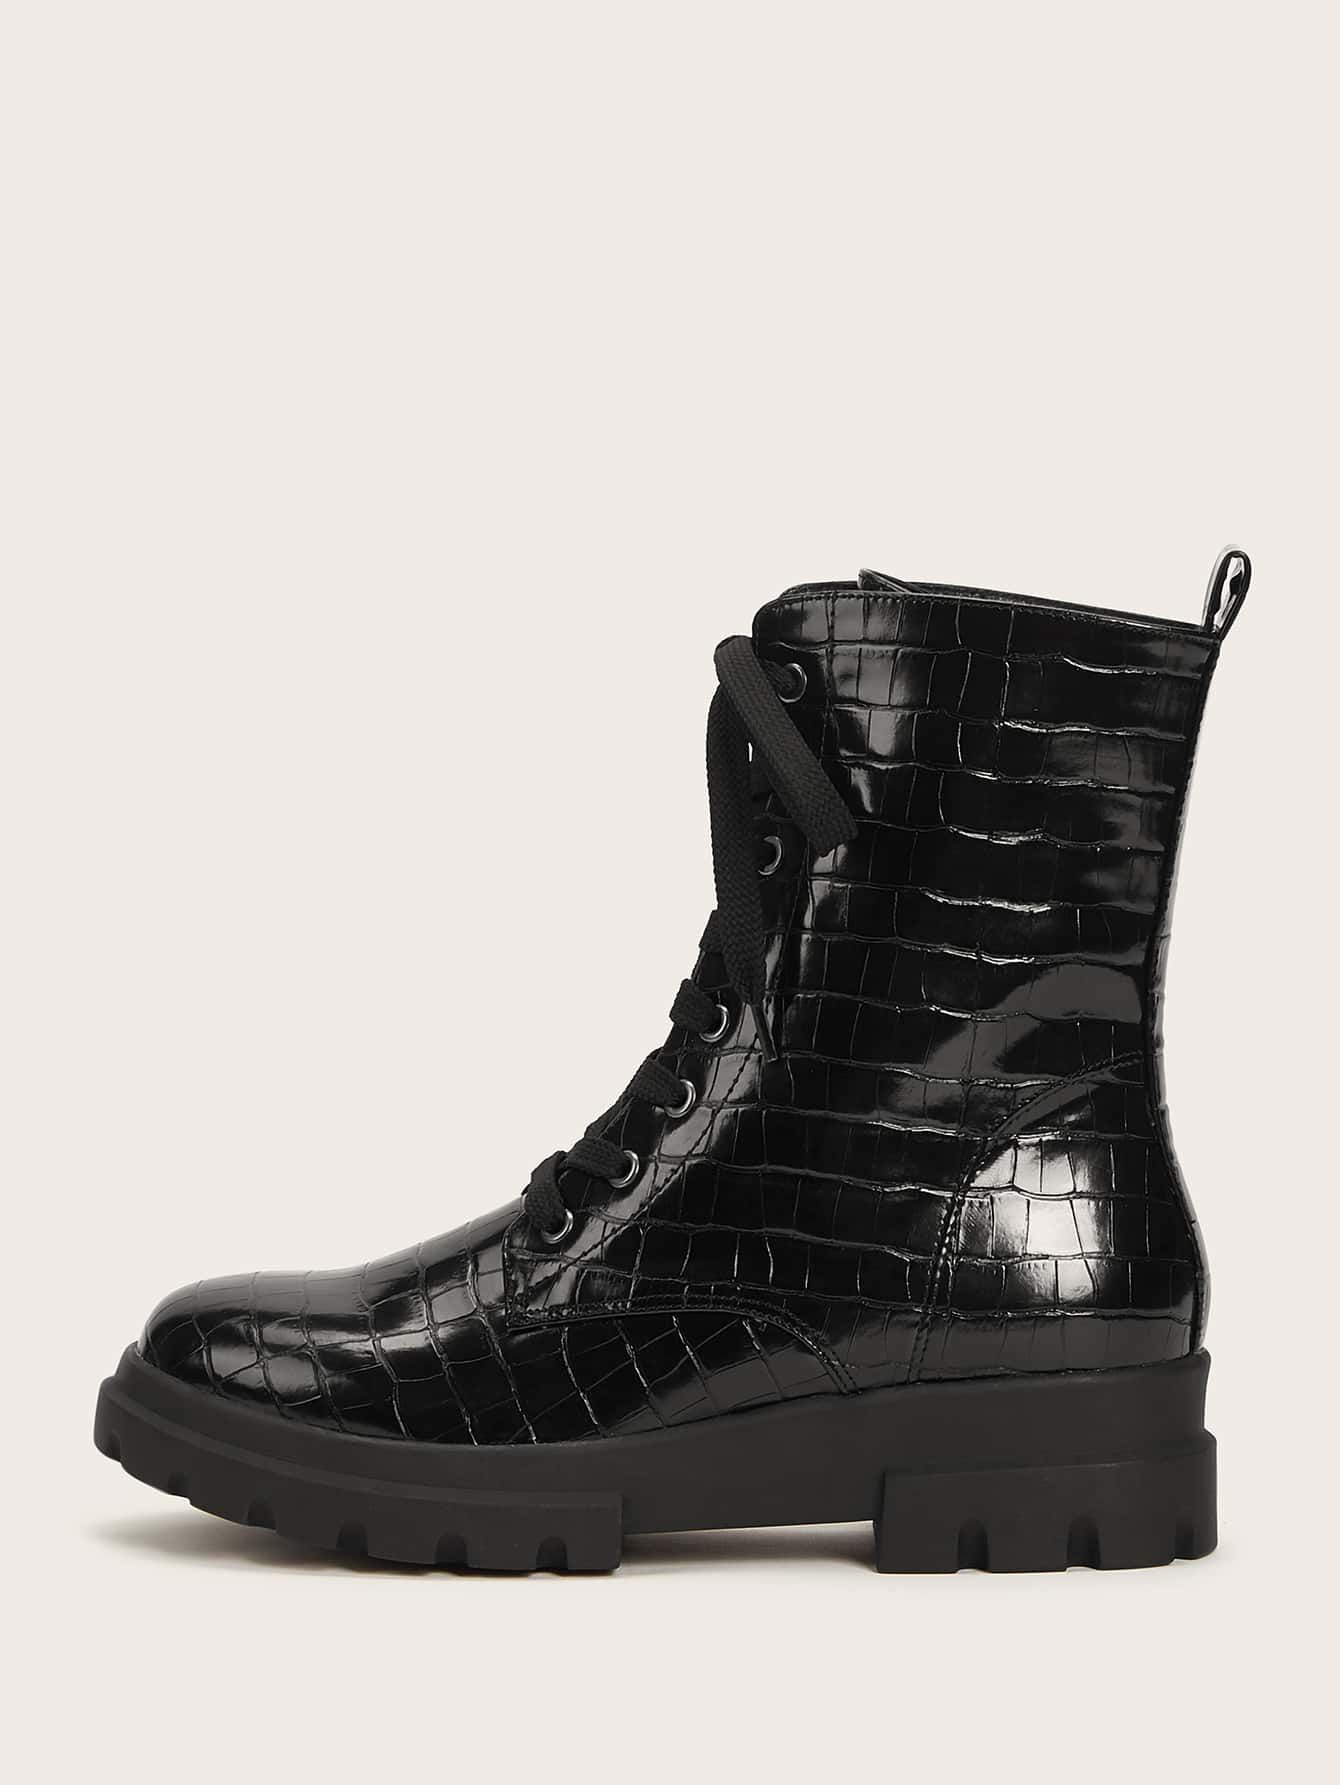 Lace-up Front Croc Embossed Combat Boots | SHEIN